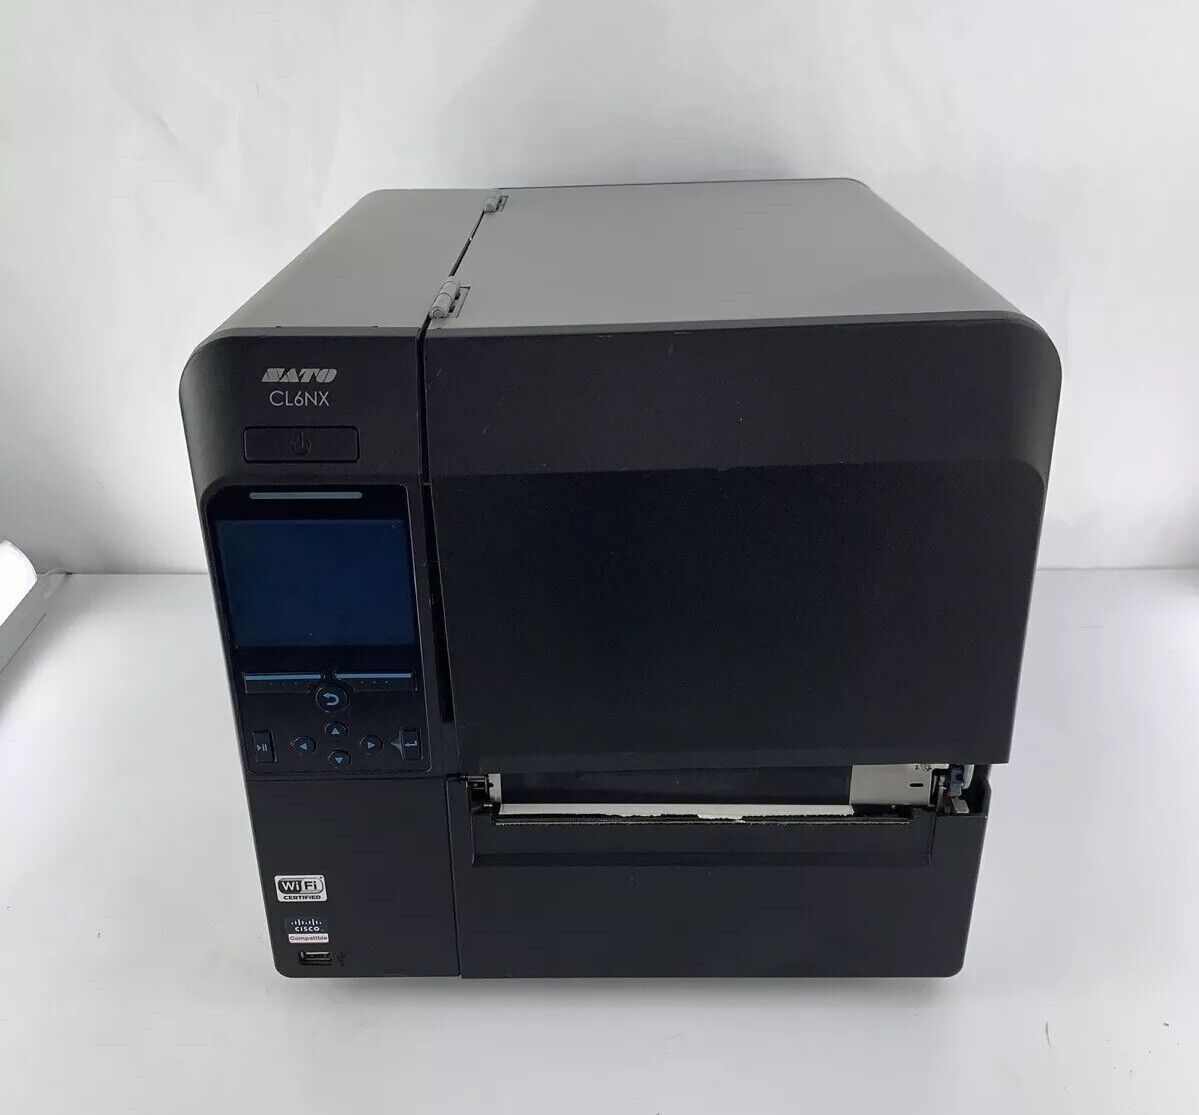 SATO CL6NX Thermal Barcode Label Printer WCCL90061 ***TESTED